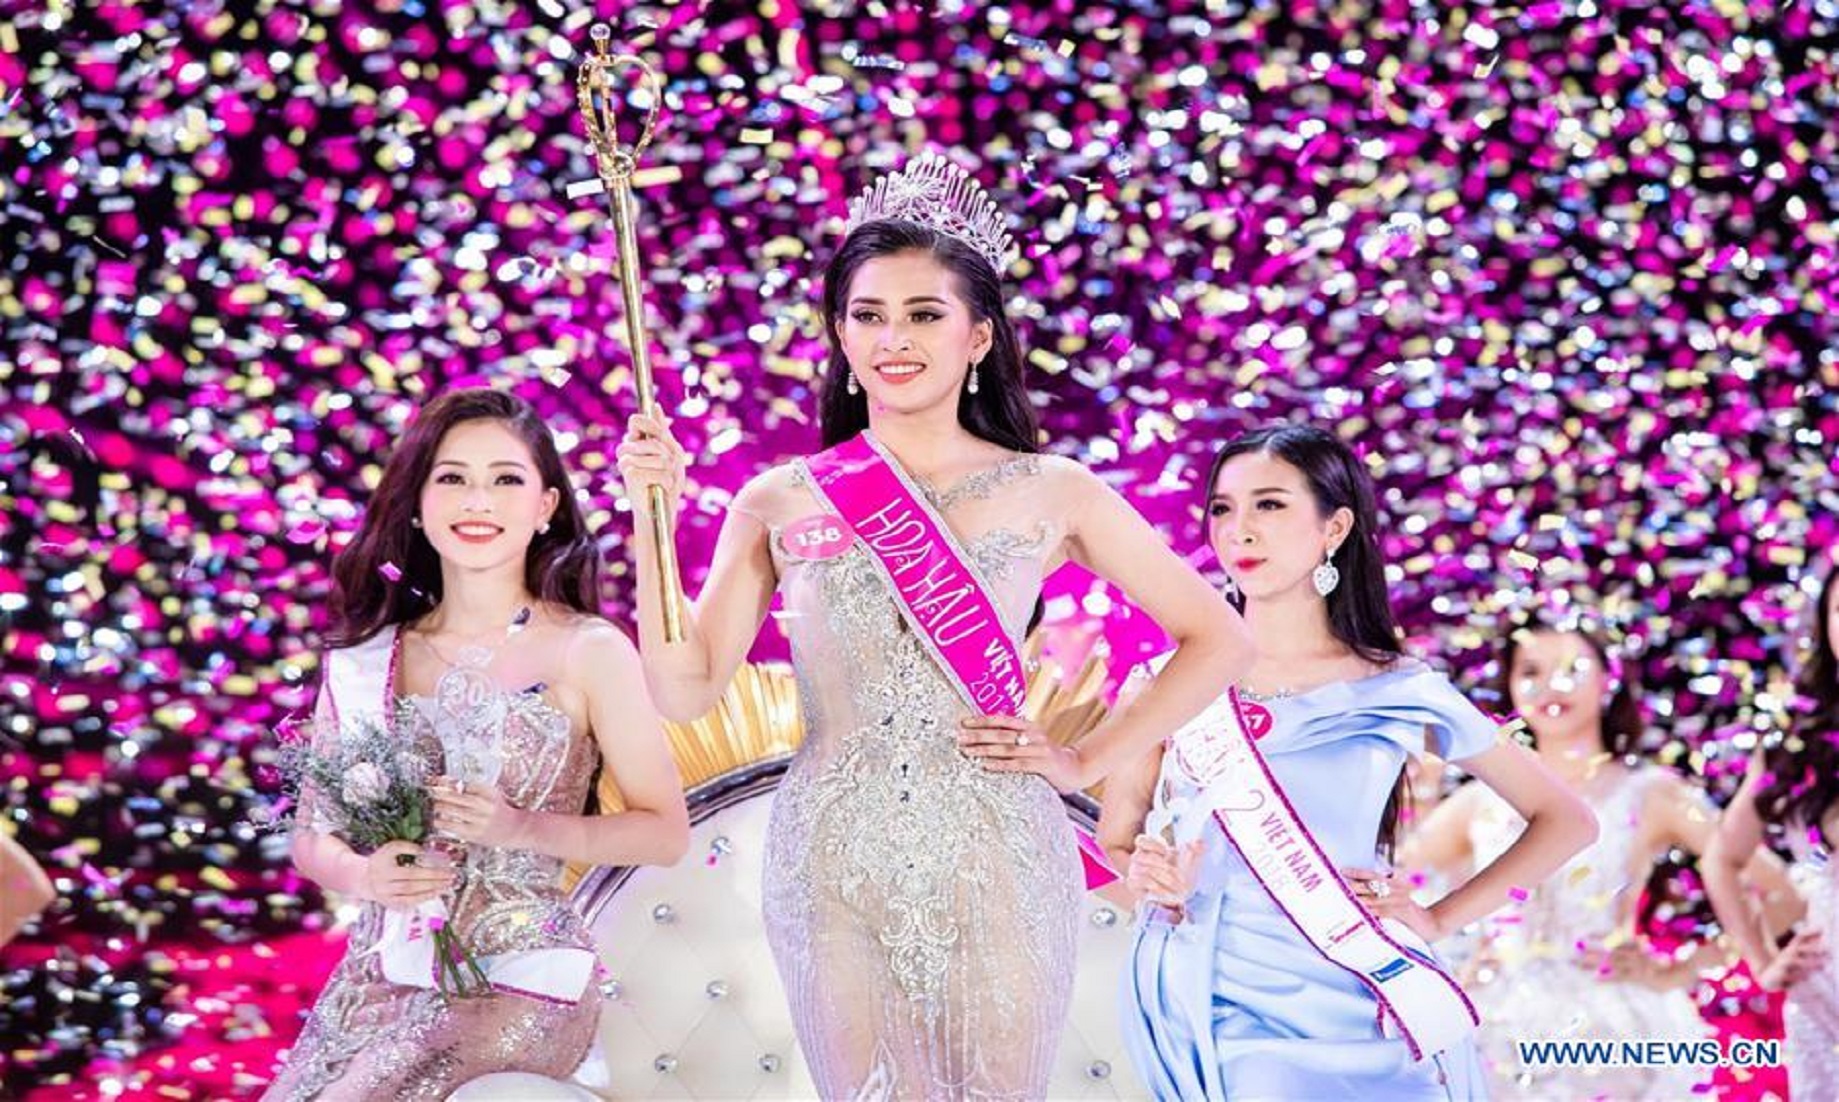 University Student Crowned Miss Vietnam In Beauty Contest